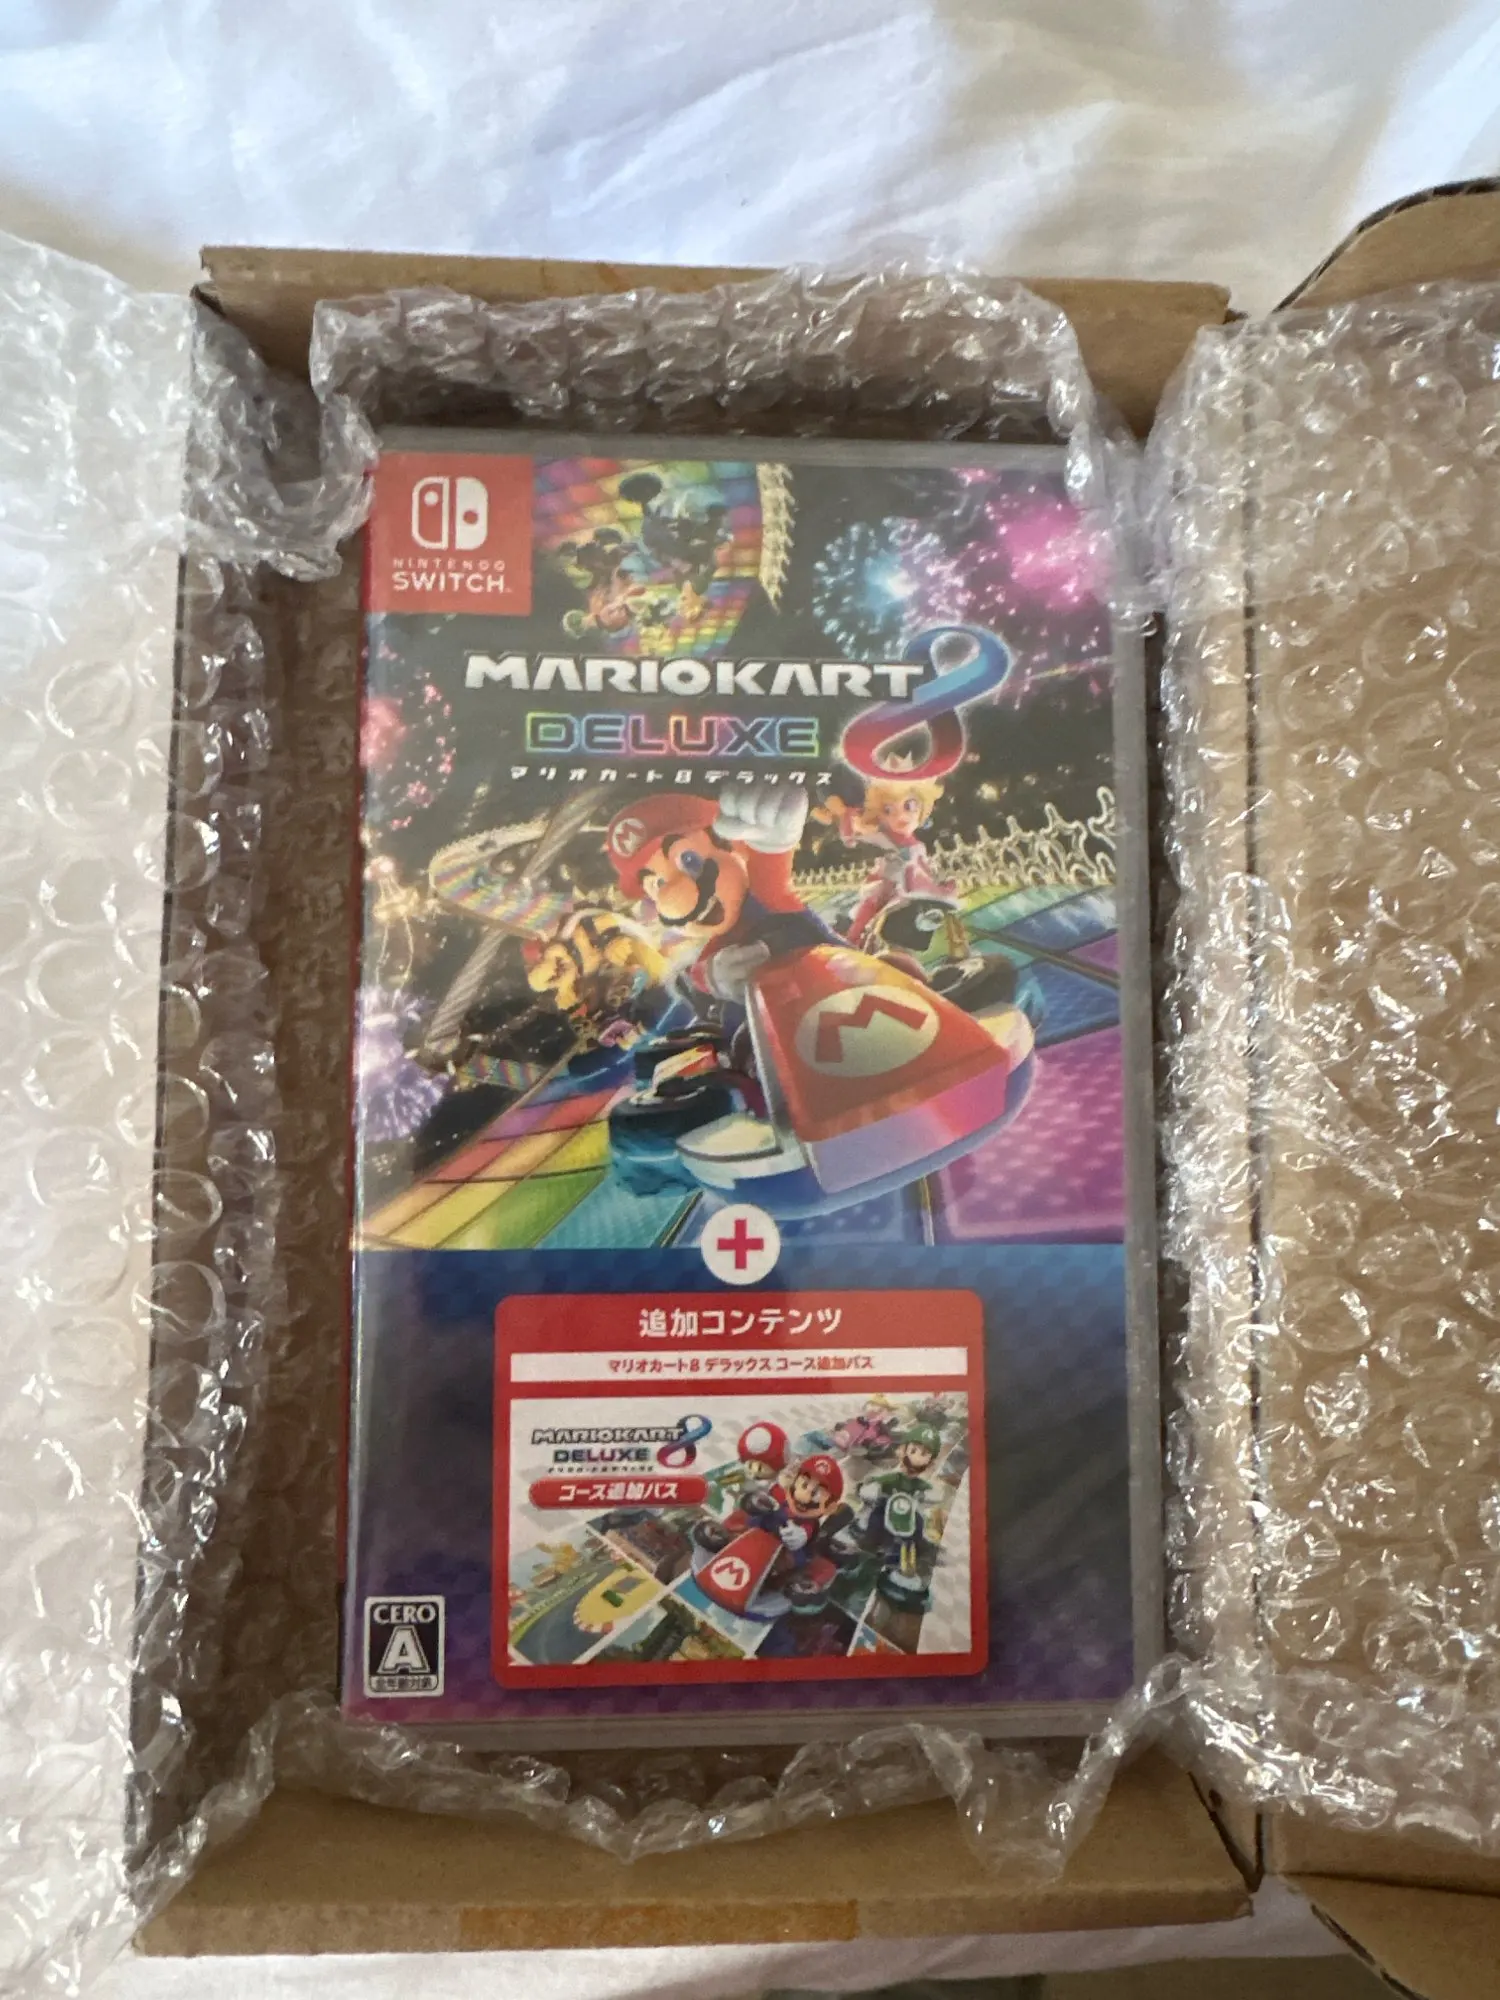 Mario Kart 8 Deluxe Bundle (Game + Booster Course Pass) Nintendo Switch Game Deals Physical Game Card for Switch OLED Lite photo review